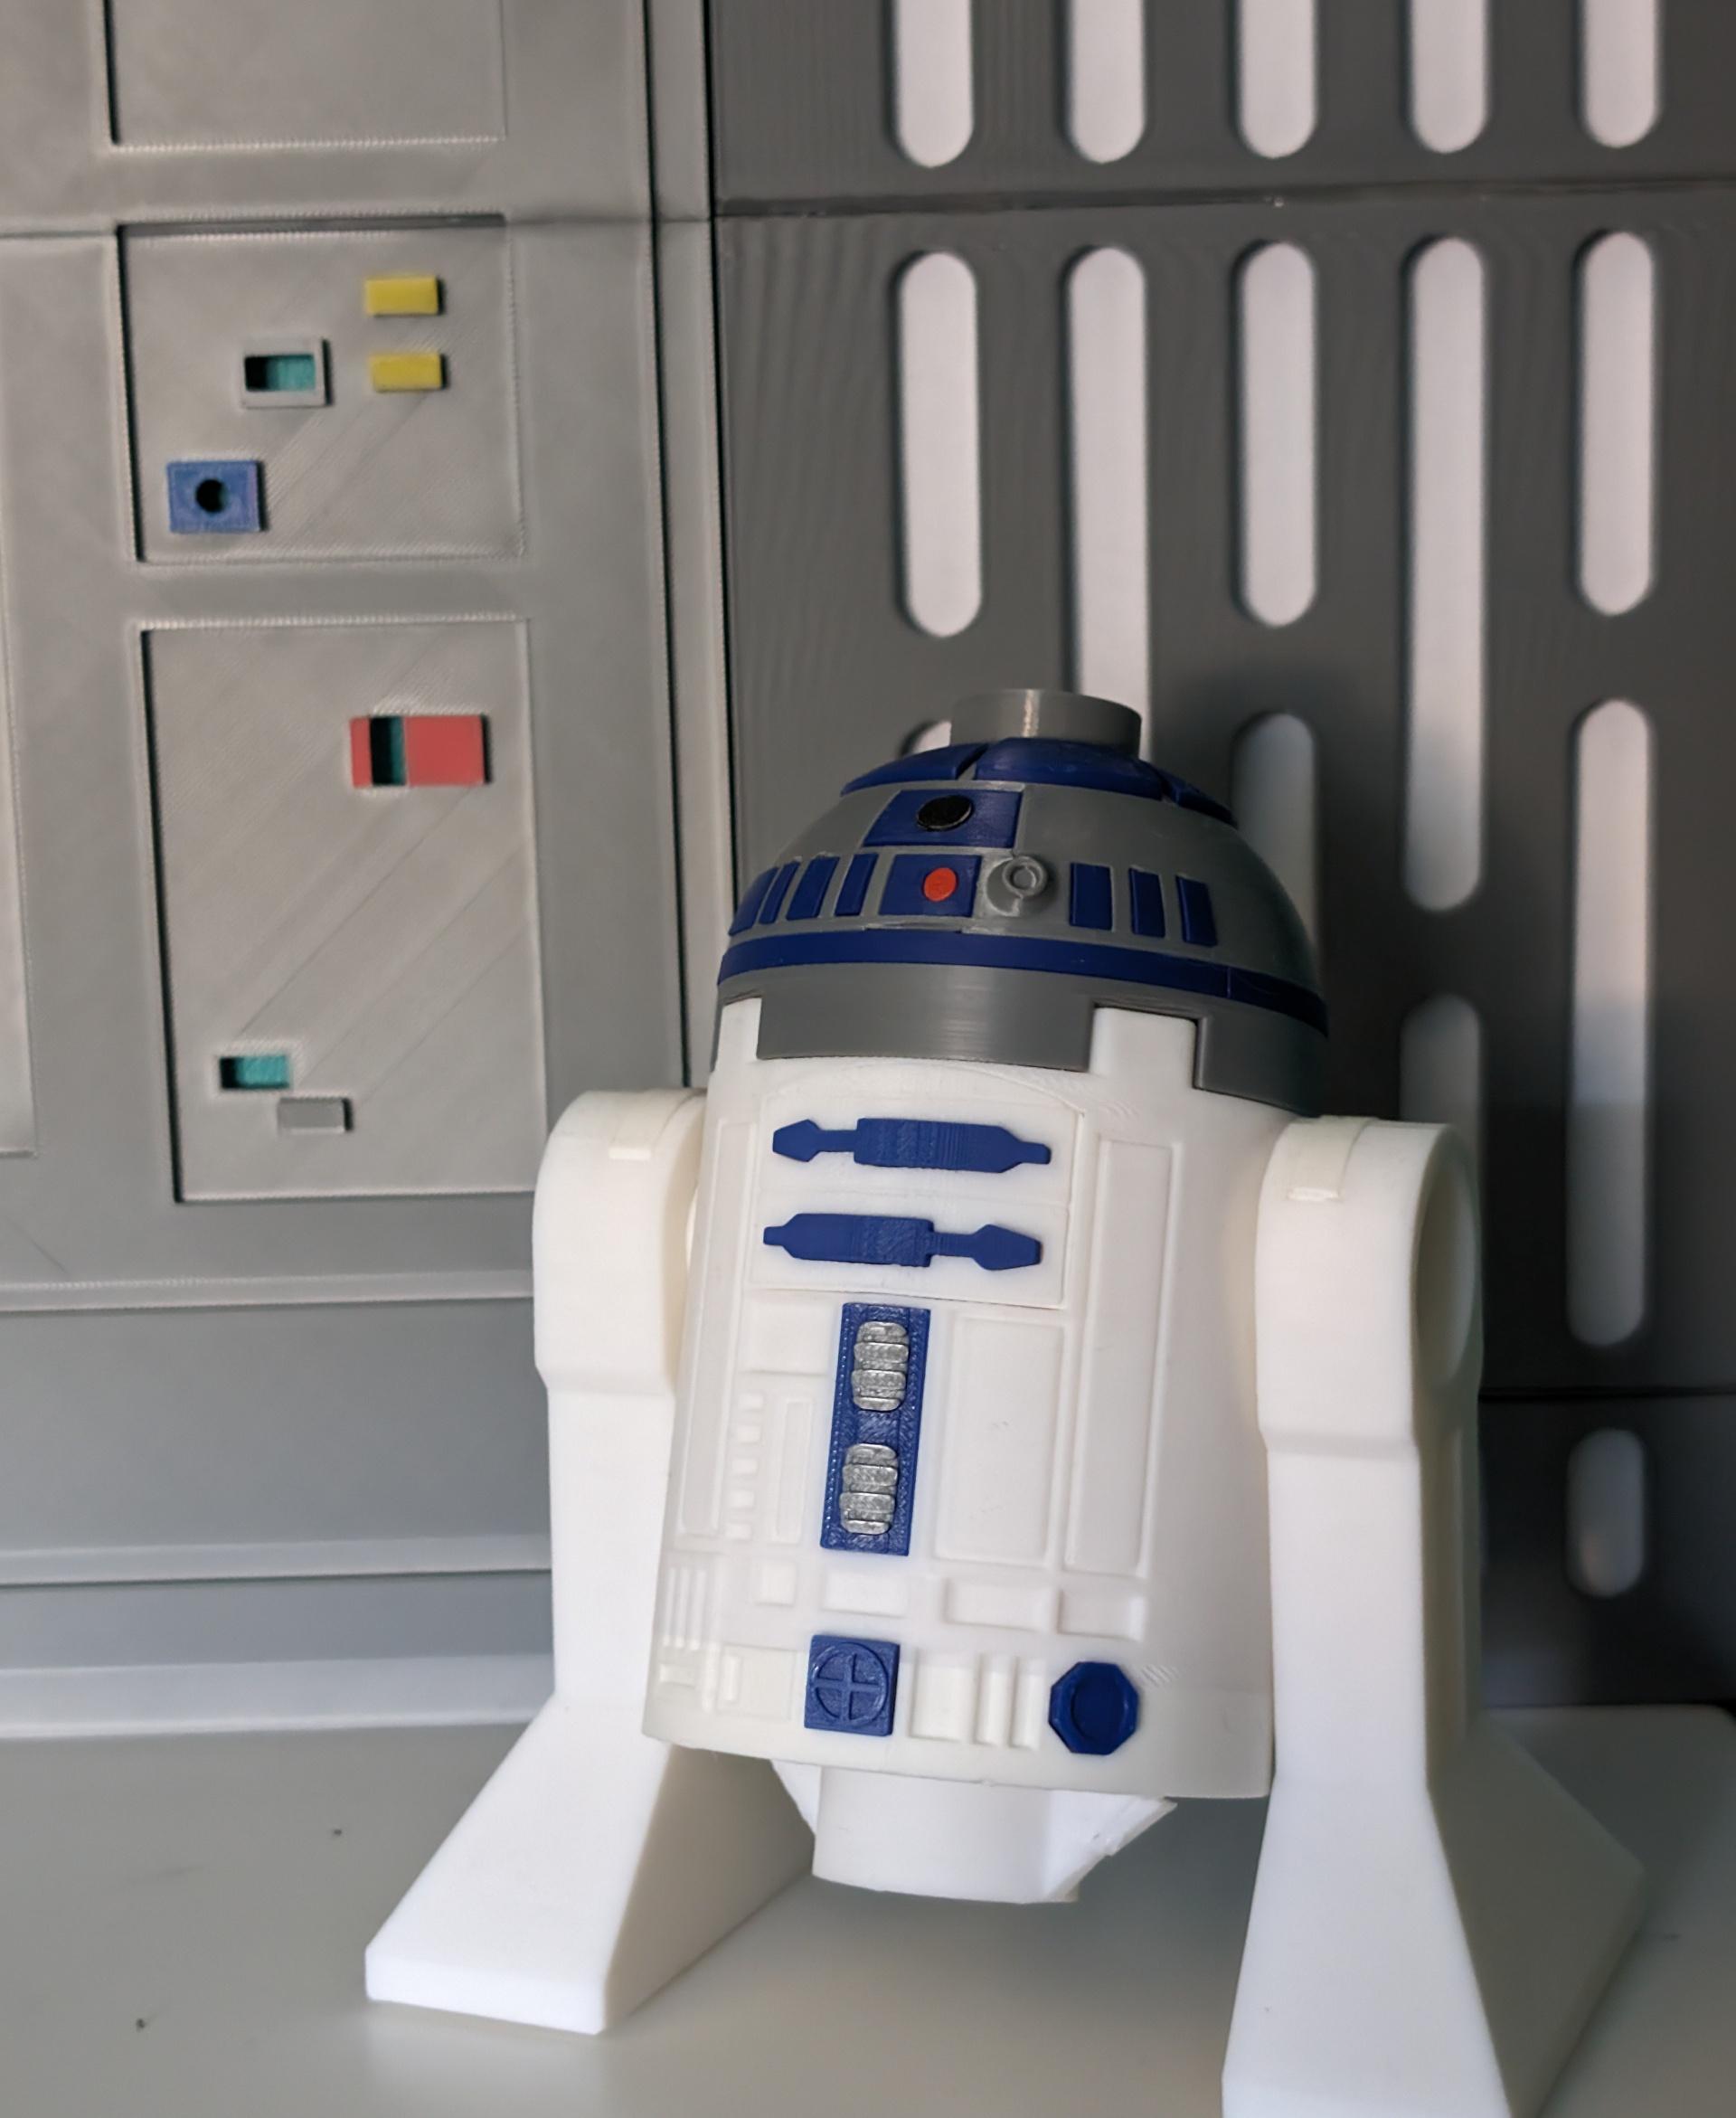 R2-D2 (6:1 LEGO-inspired brick figure, NO MMU/AMS, NO supports, NO glue) - Beep Boop Beep

First model I printed absolutely amazing. - 3d model